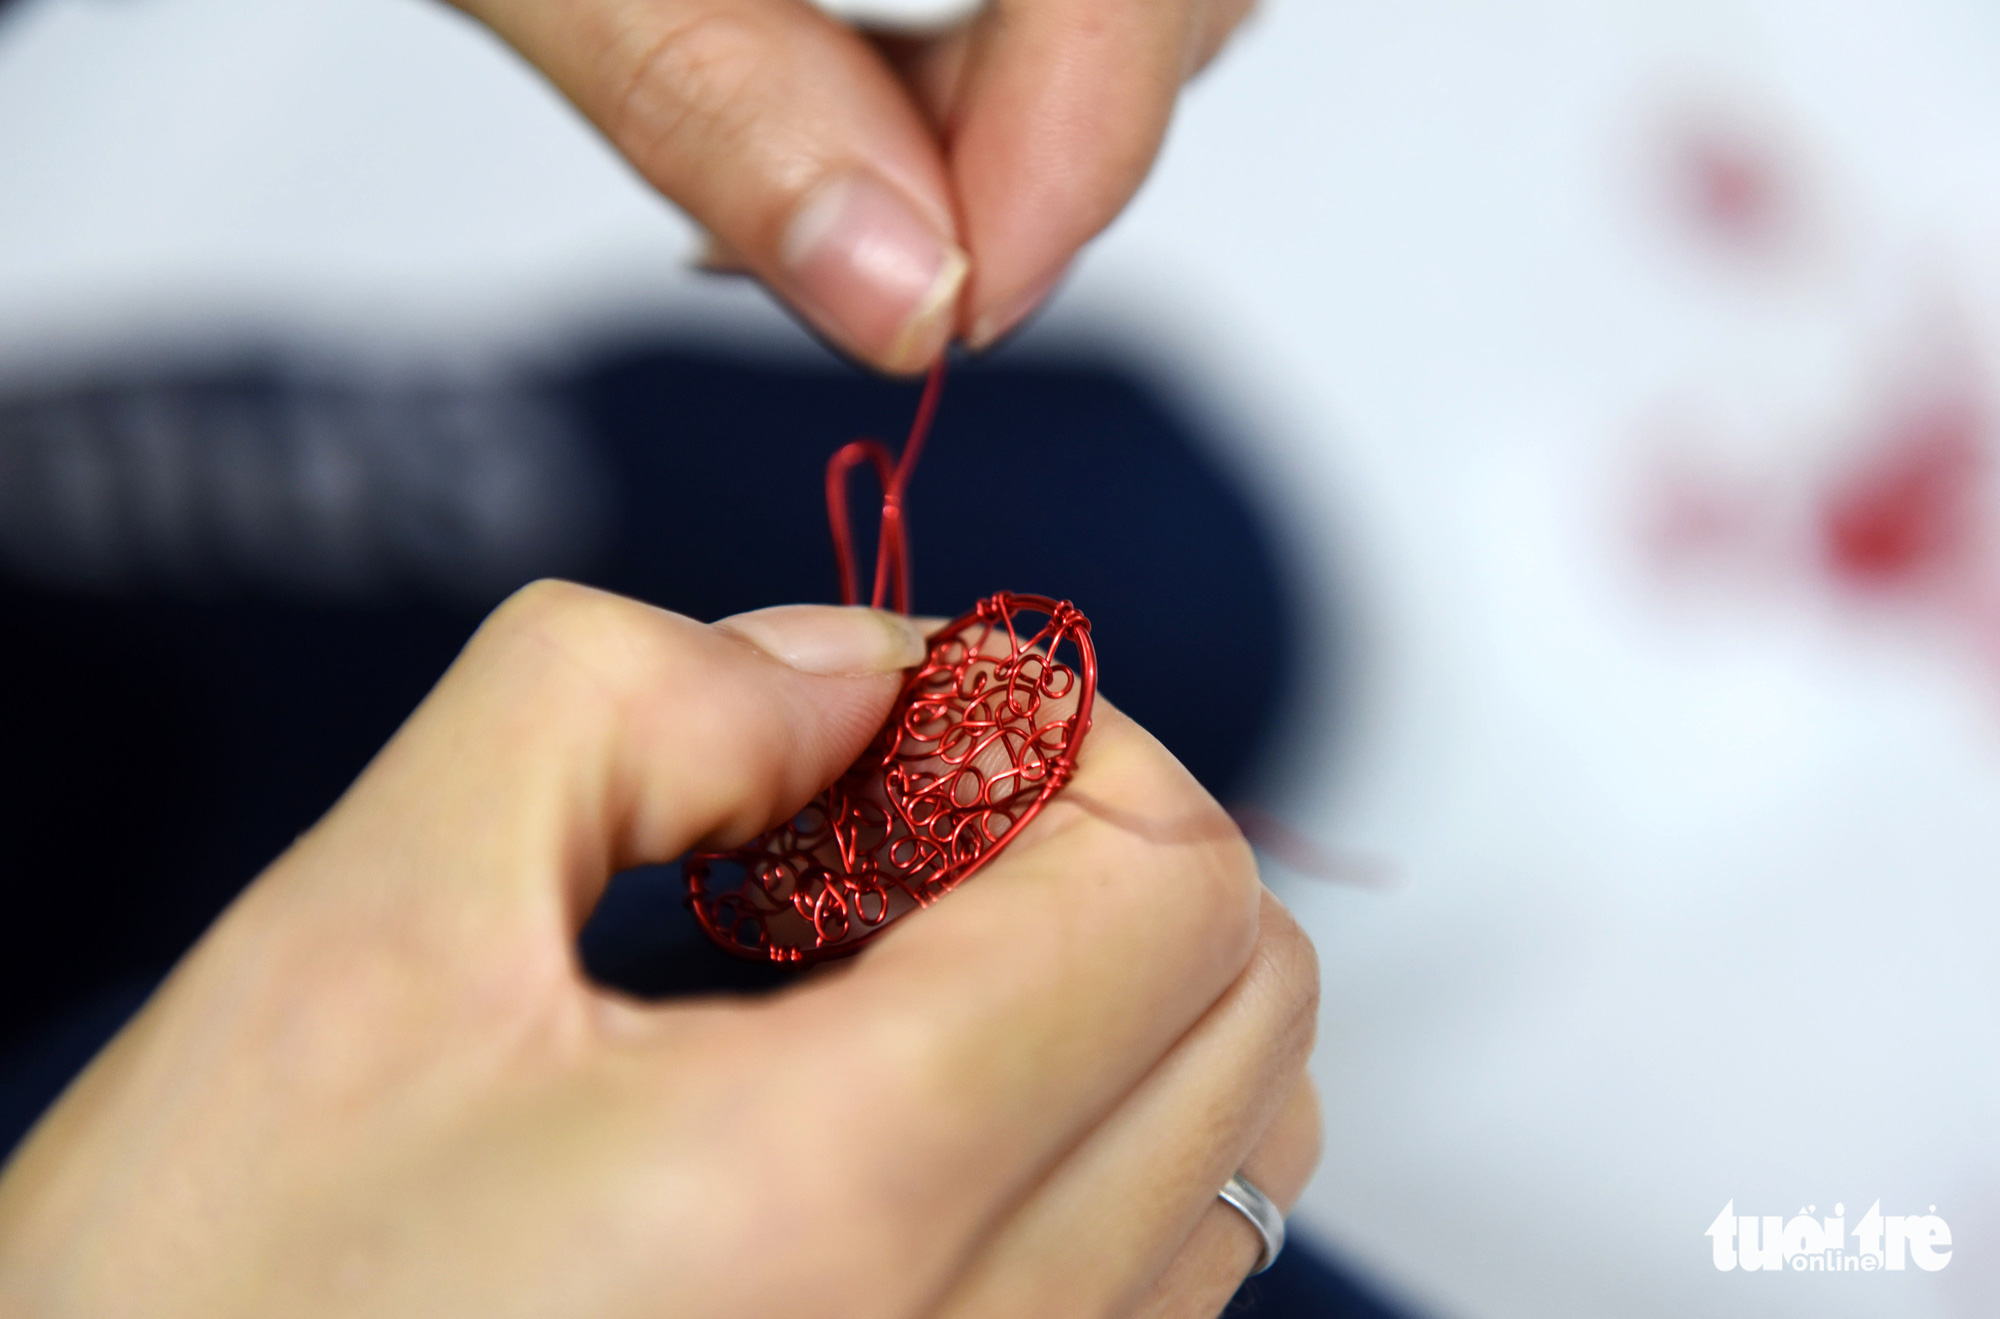 Ornaments are created with copper wires at an art class in Ho Chi Minh City, Vietnam. Photo: Duyen Phan / Tuoi Tre